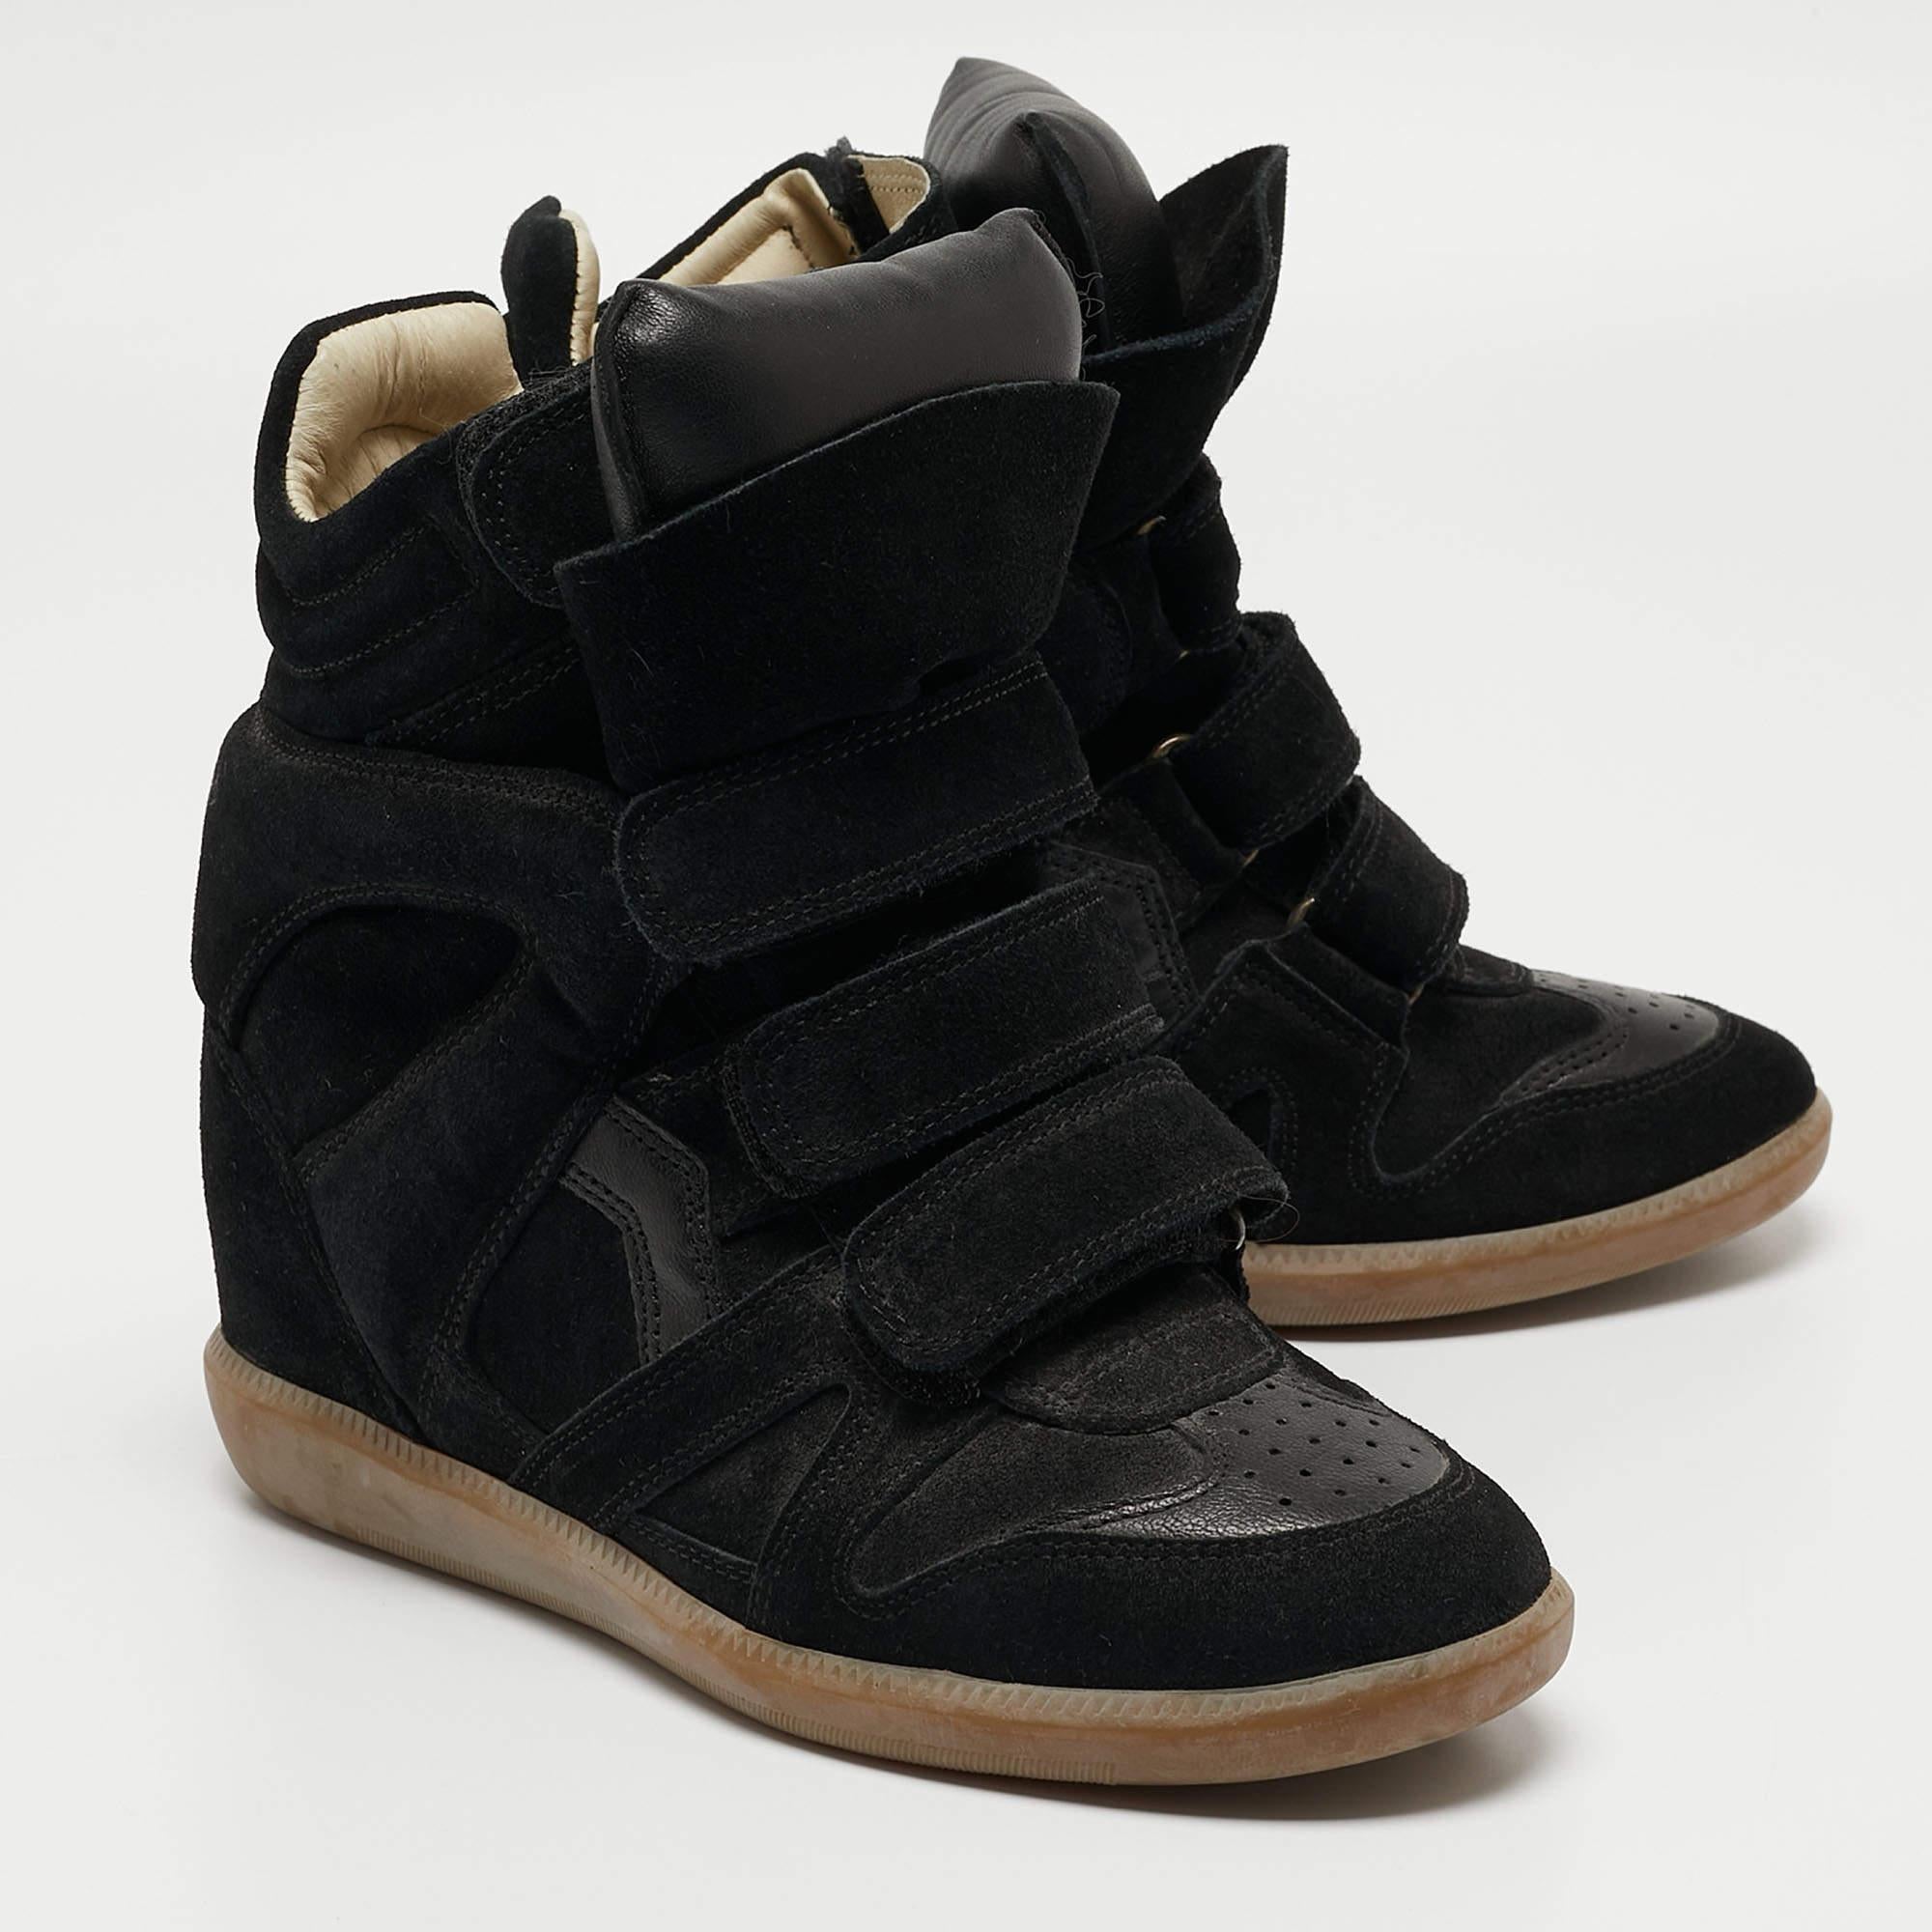 Isabel Marant Black Leather and Suede Wedge Sneakers Size 37 For Sale 3